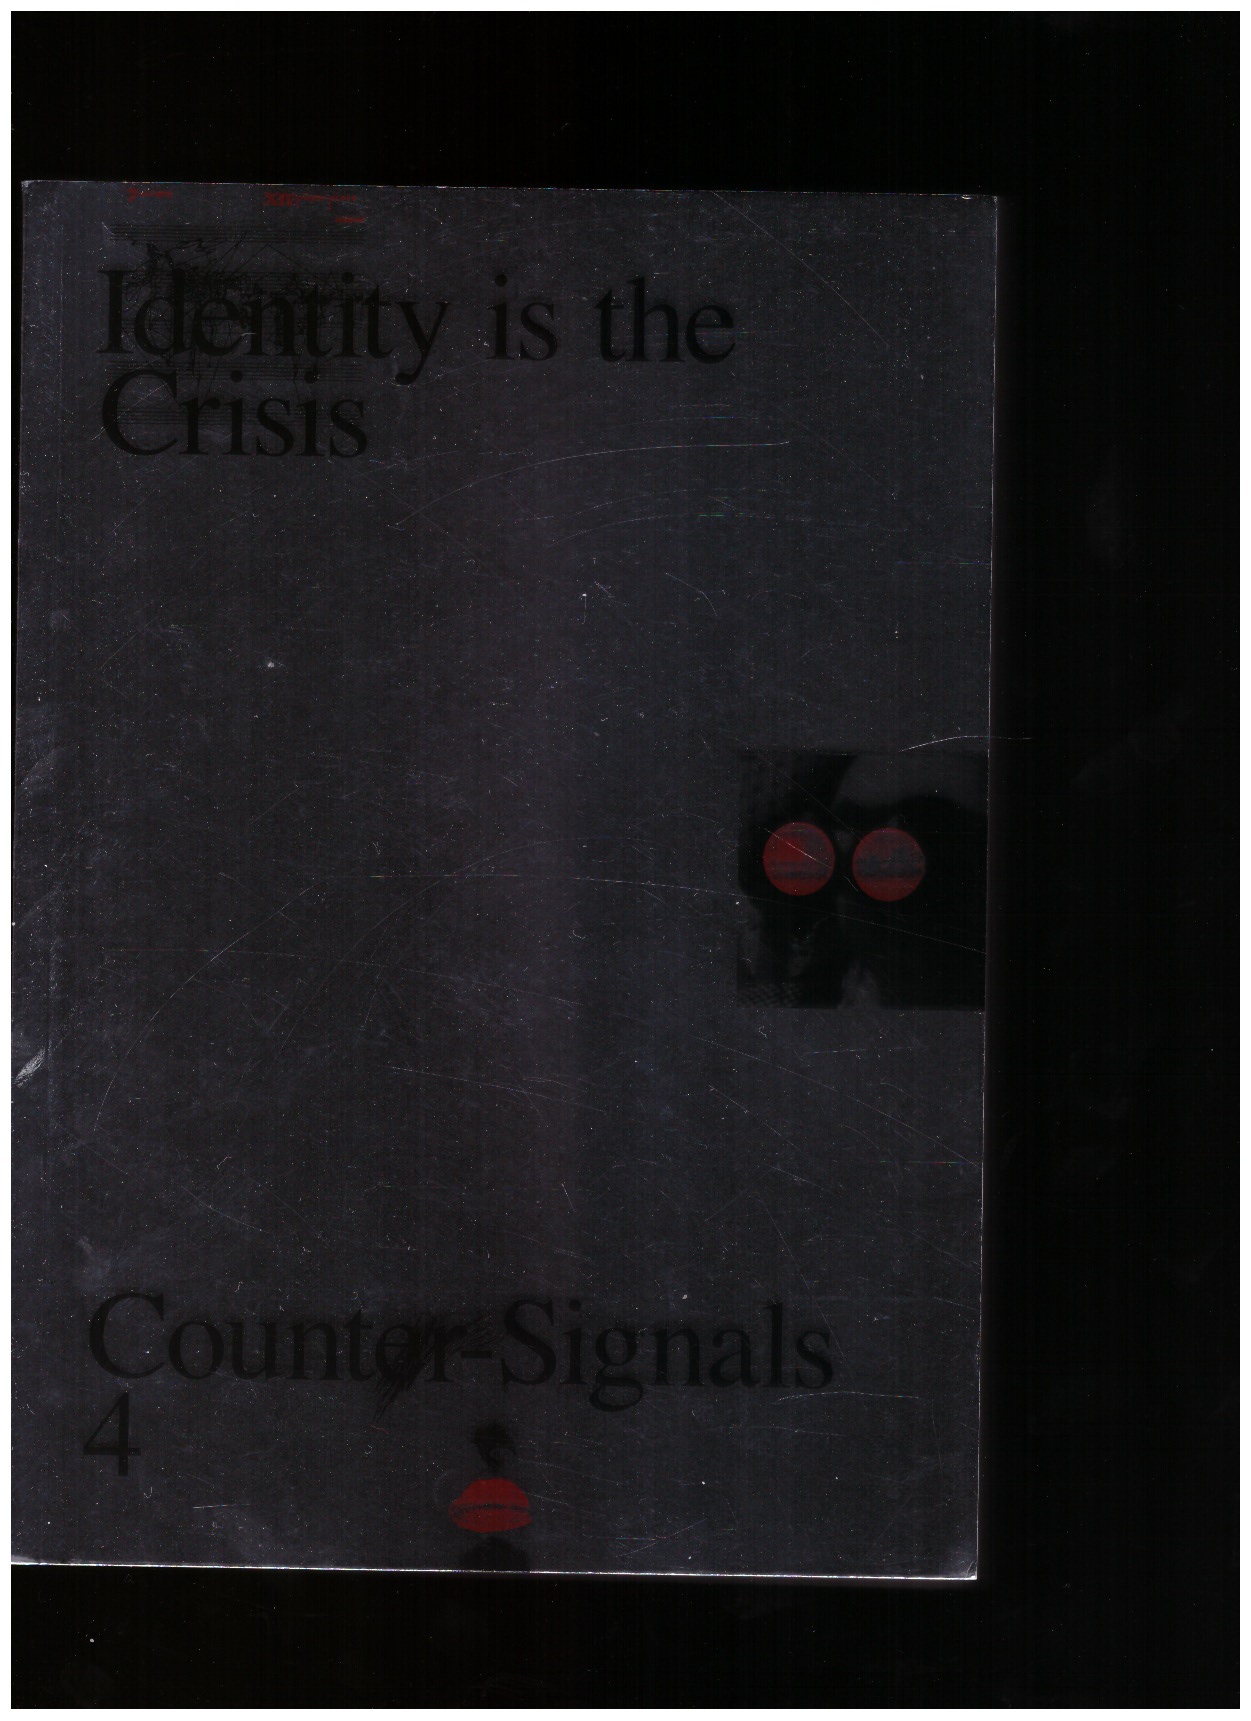 FISHER, Jack Henrie (ed.) - Counter-Signals #4: Identity is the Crisis, Can’t You See?